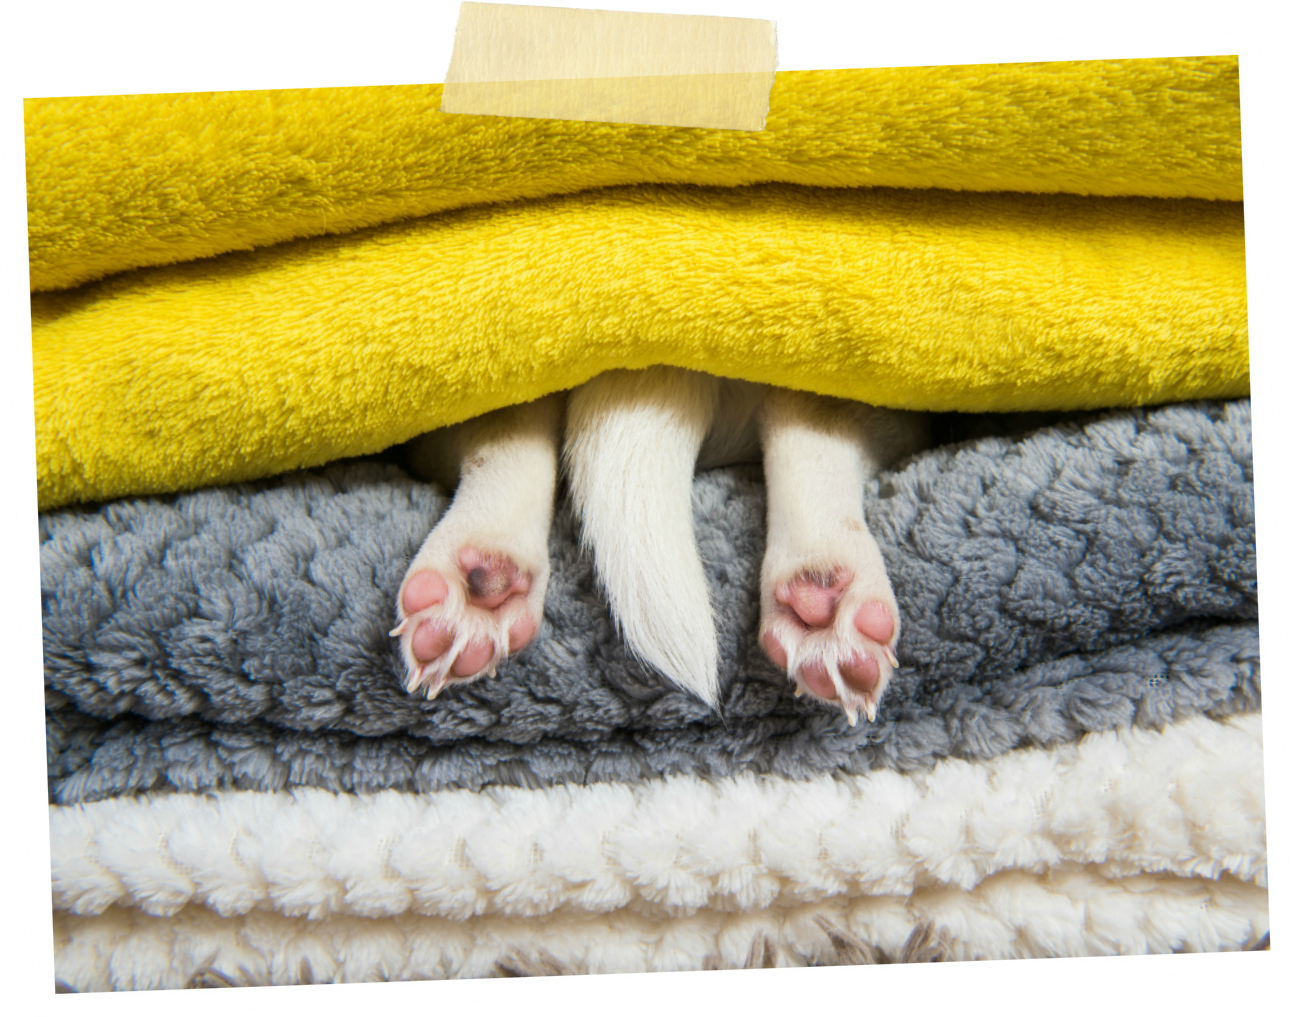 Photo of dog's tail and rear paws sticking out from stack of blankets